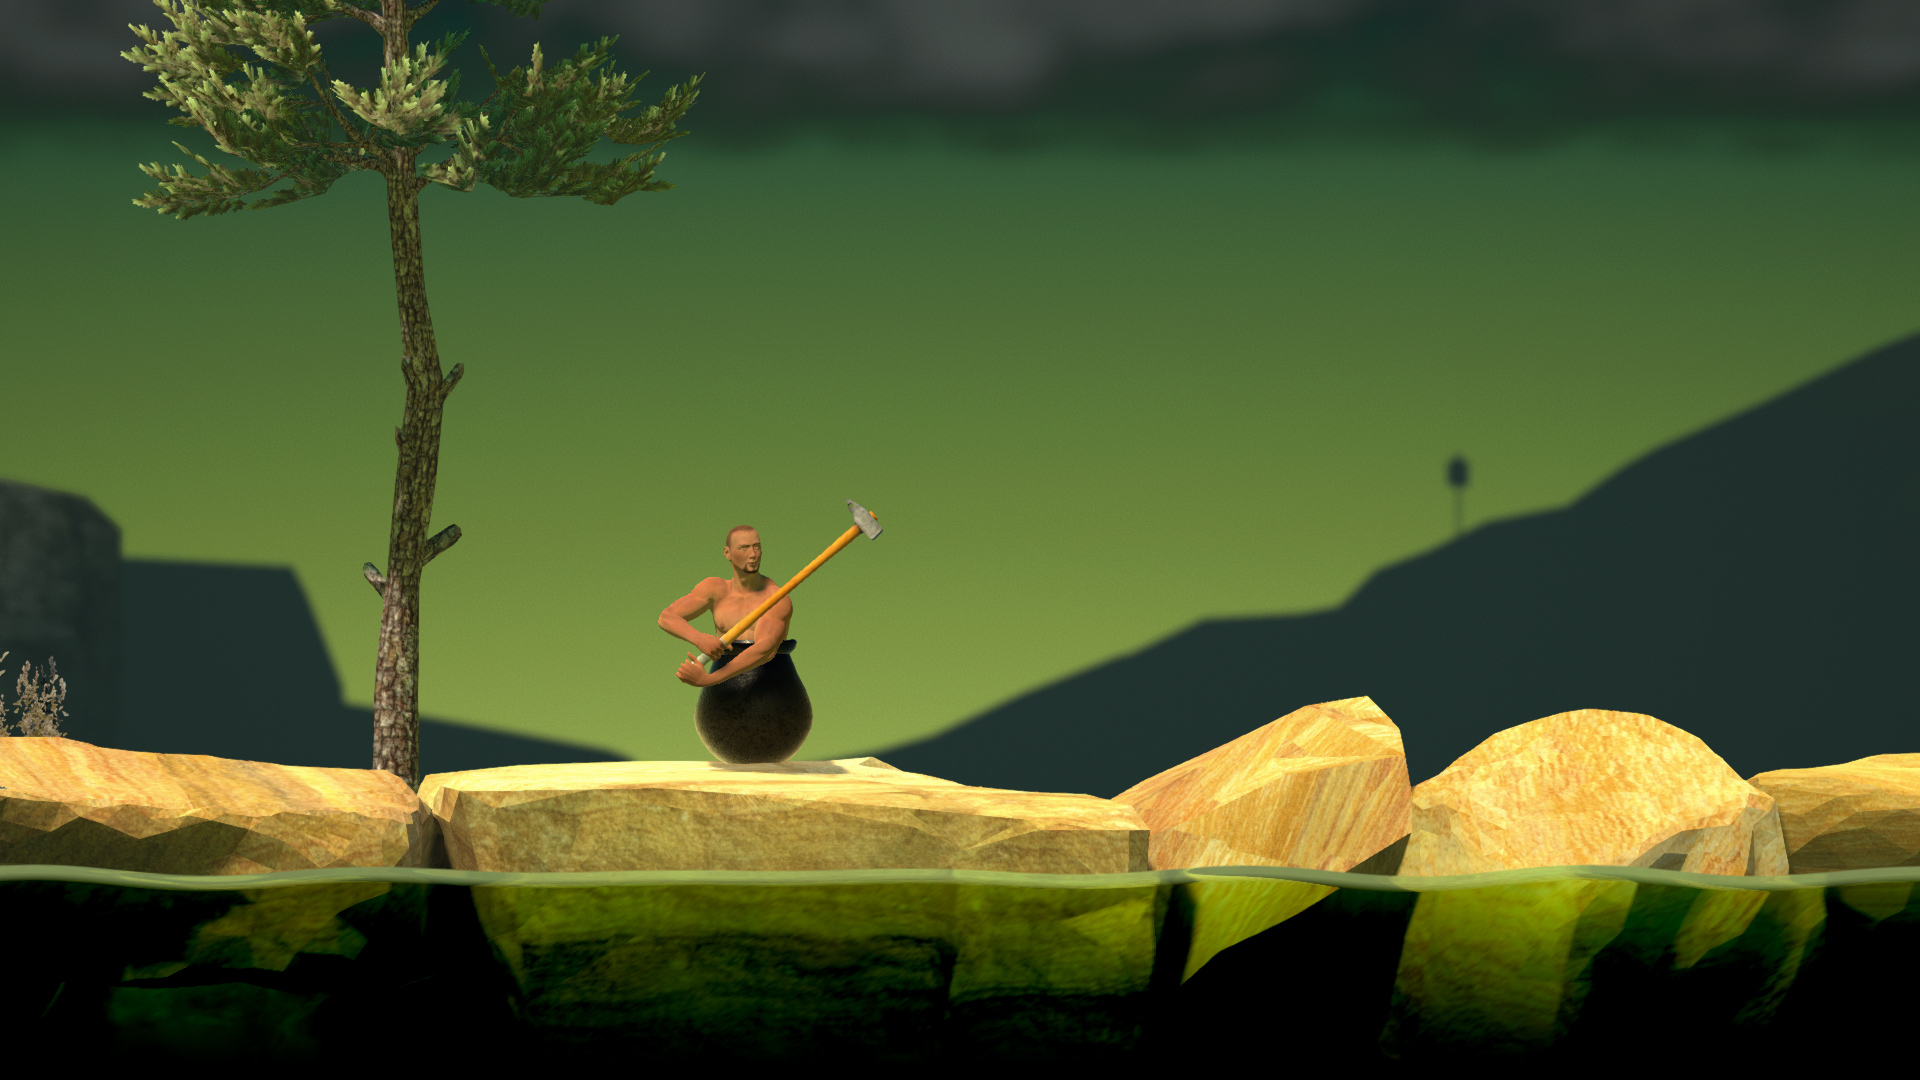 Getting Over It with Bennett Foddy Playthrough